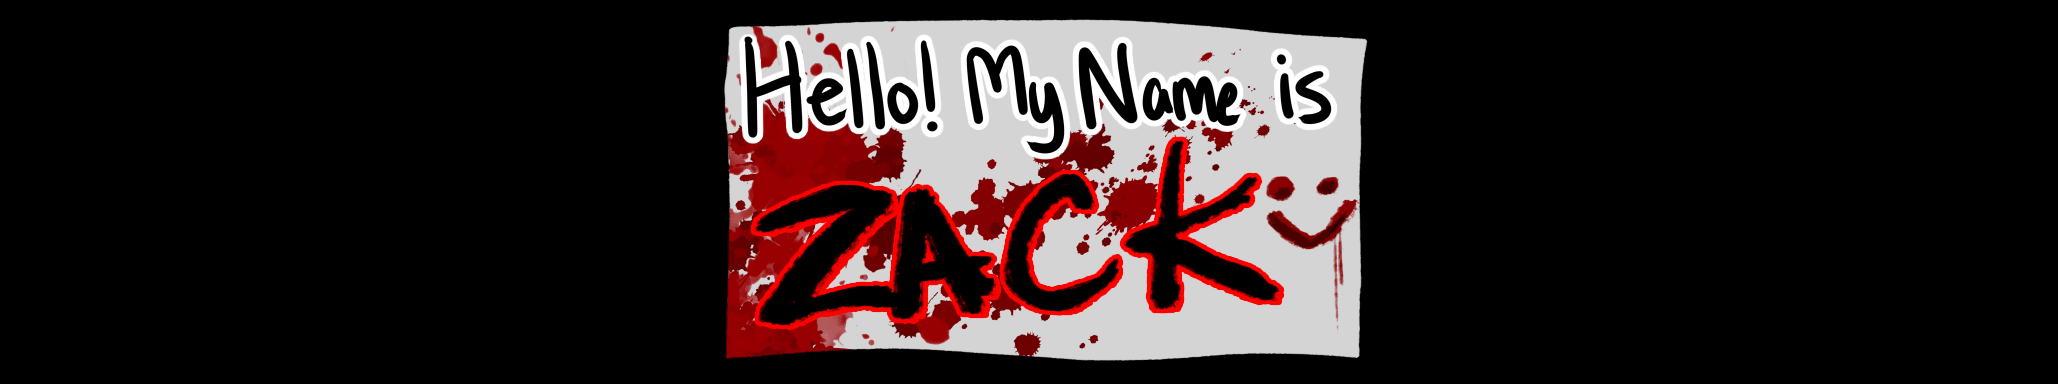 Hello! My Name is Zack